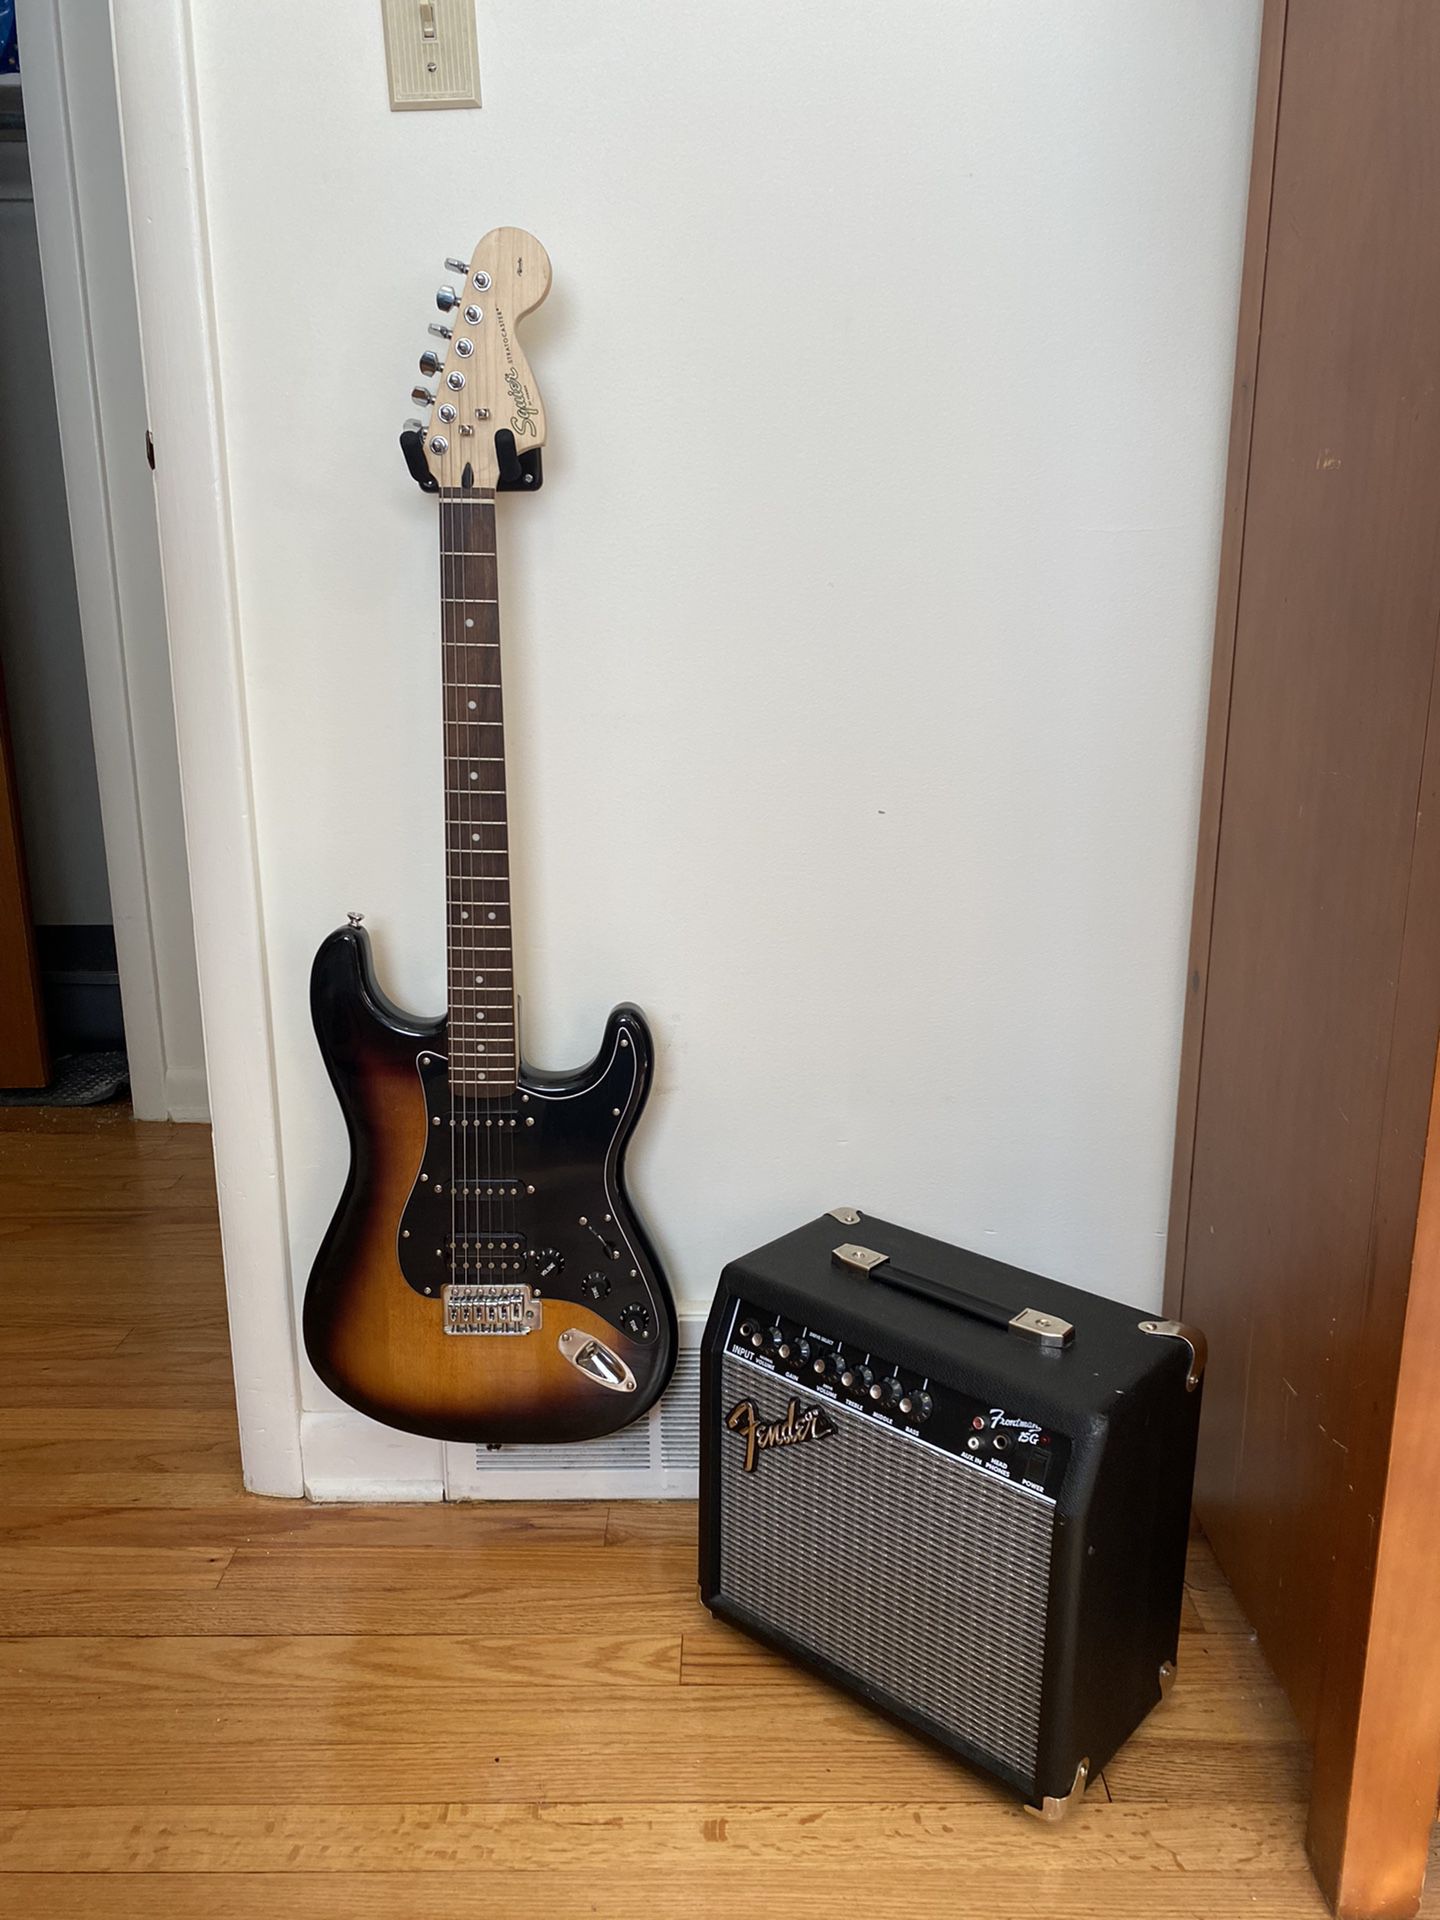 Stratocaster Electric Guitar, Amp, Bag & Accessories.